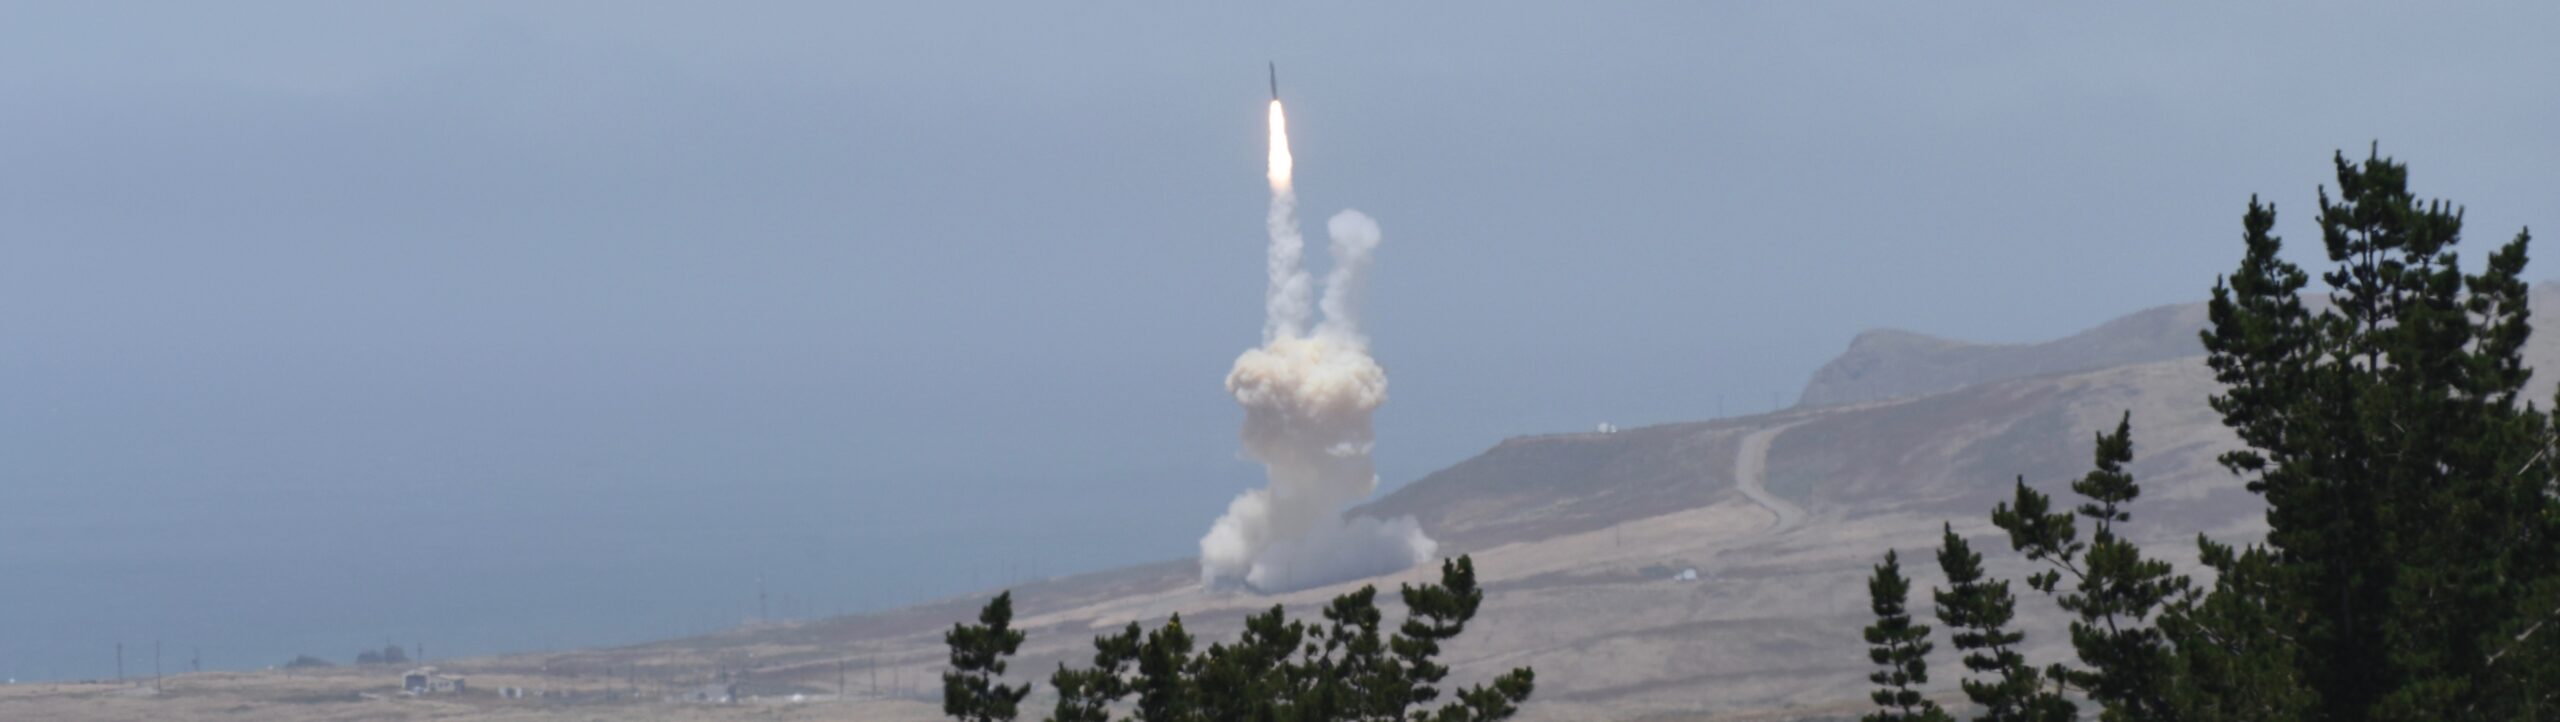 Missile Defense Test ‘Realistic,’ Syring Insists